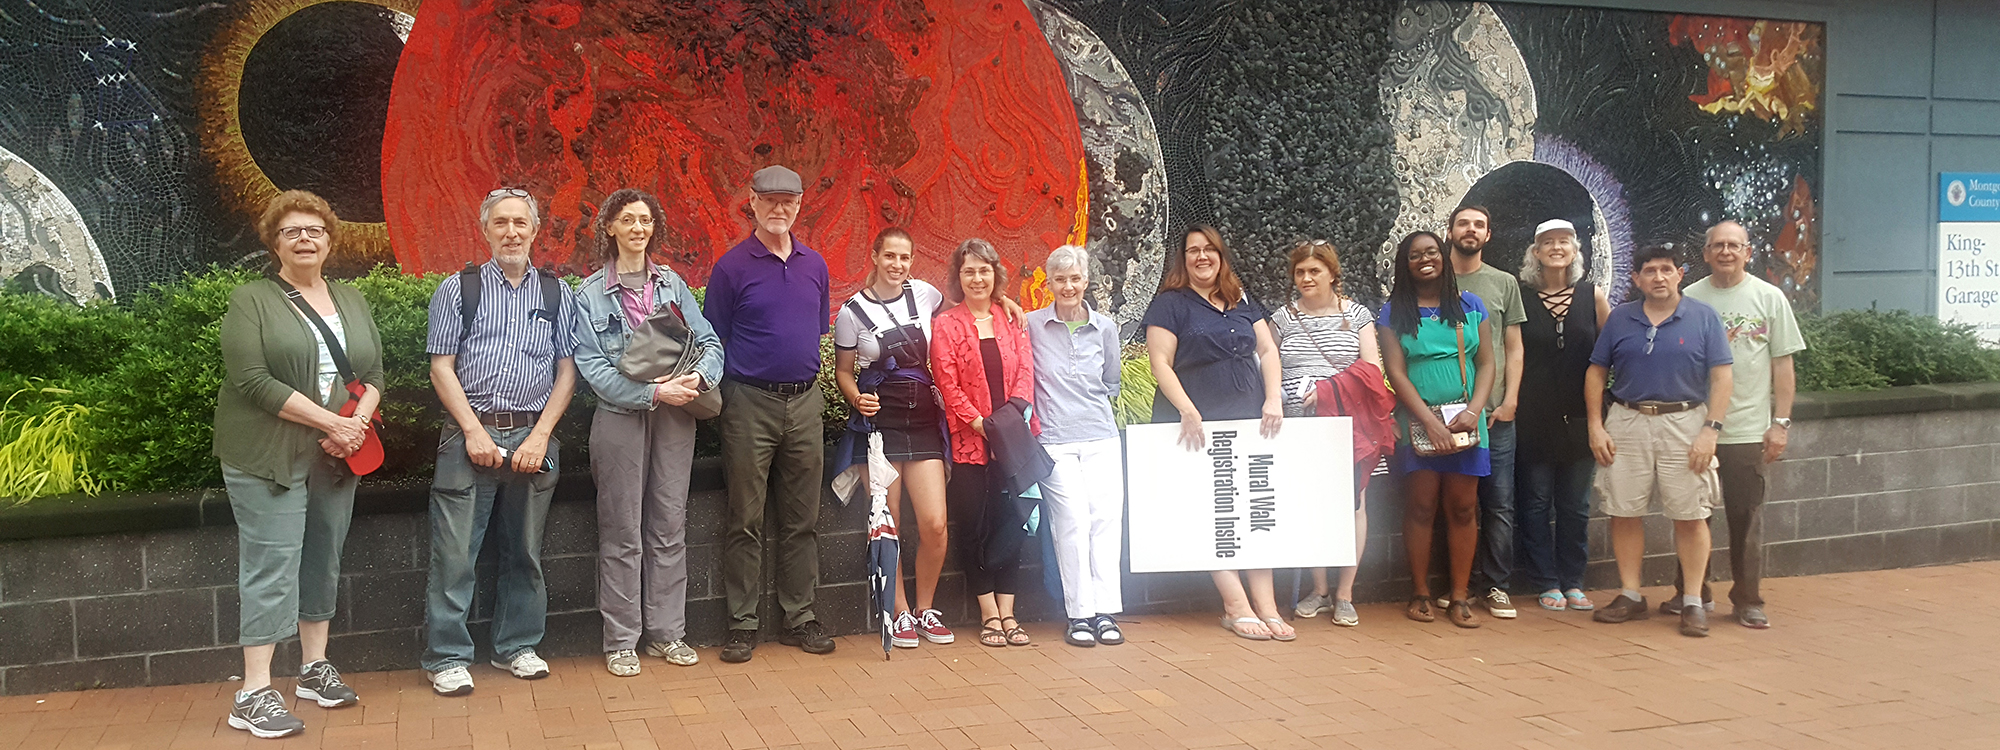 Participants in front of mural during Silver Spring Art Walk